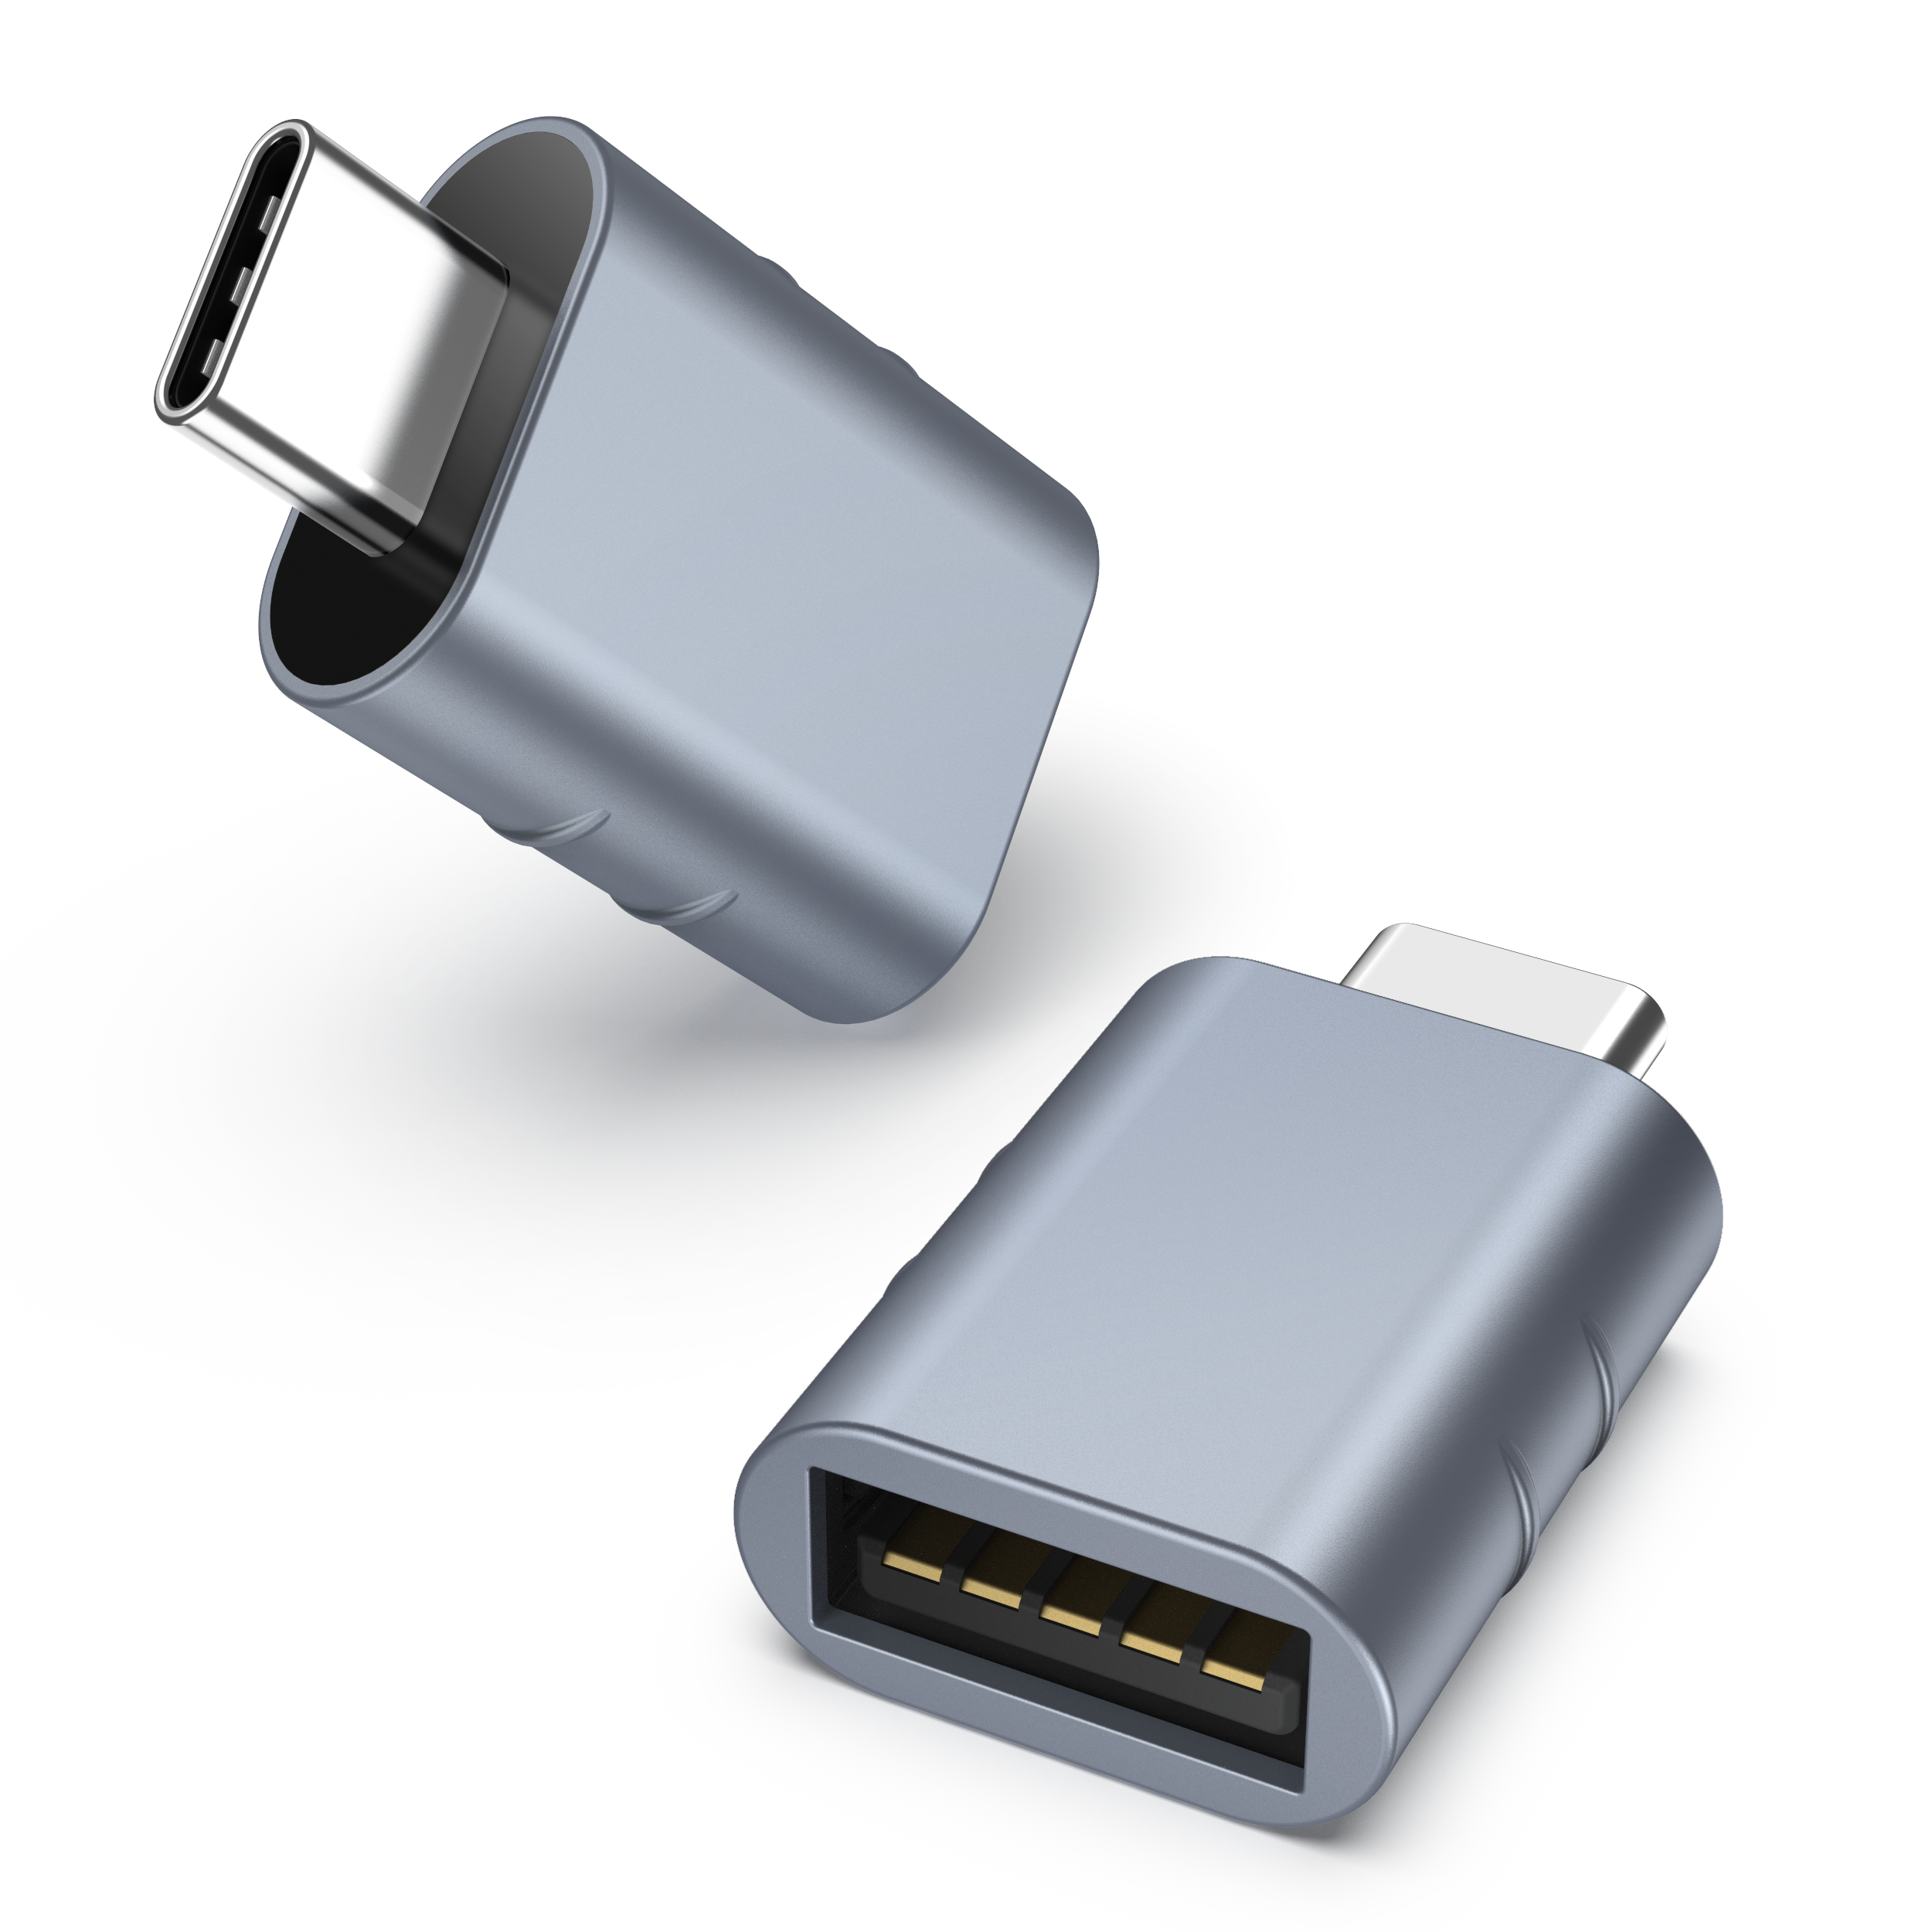  Anker USB-C to USB 3.1 Adapter, USB-C Male to USB-A